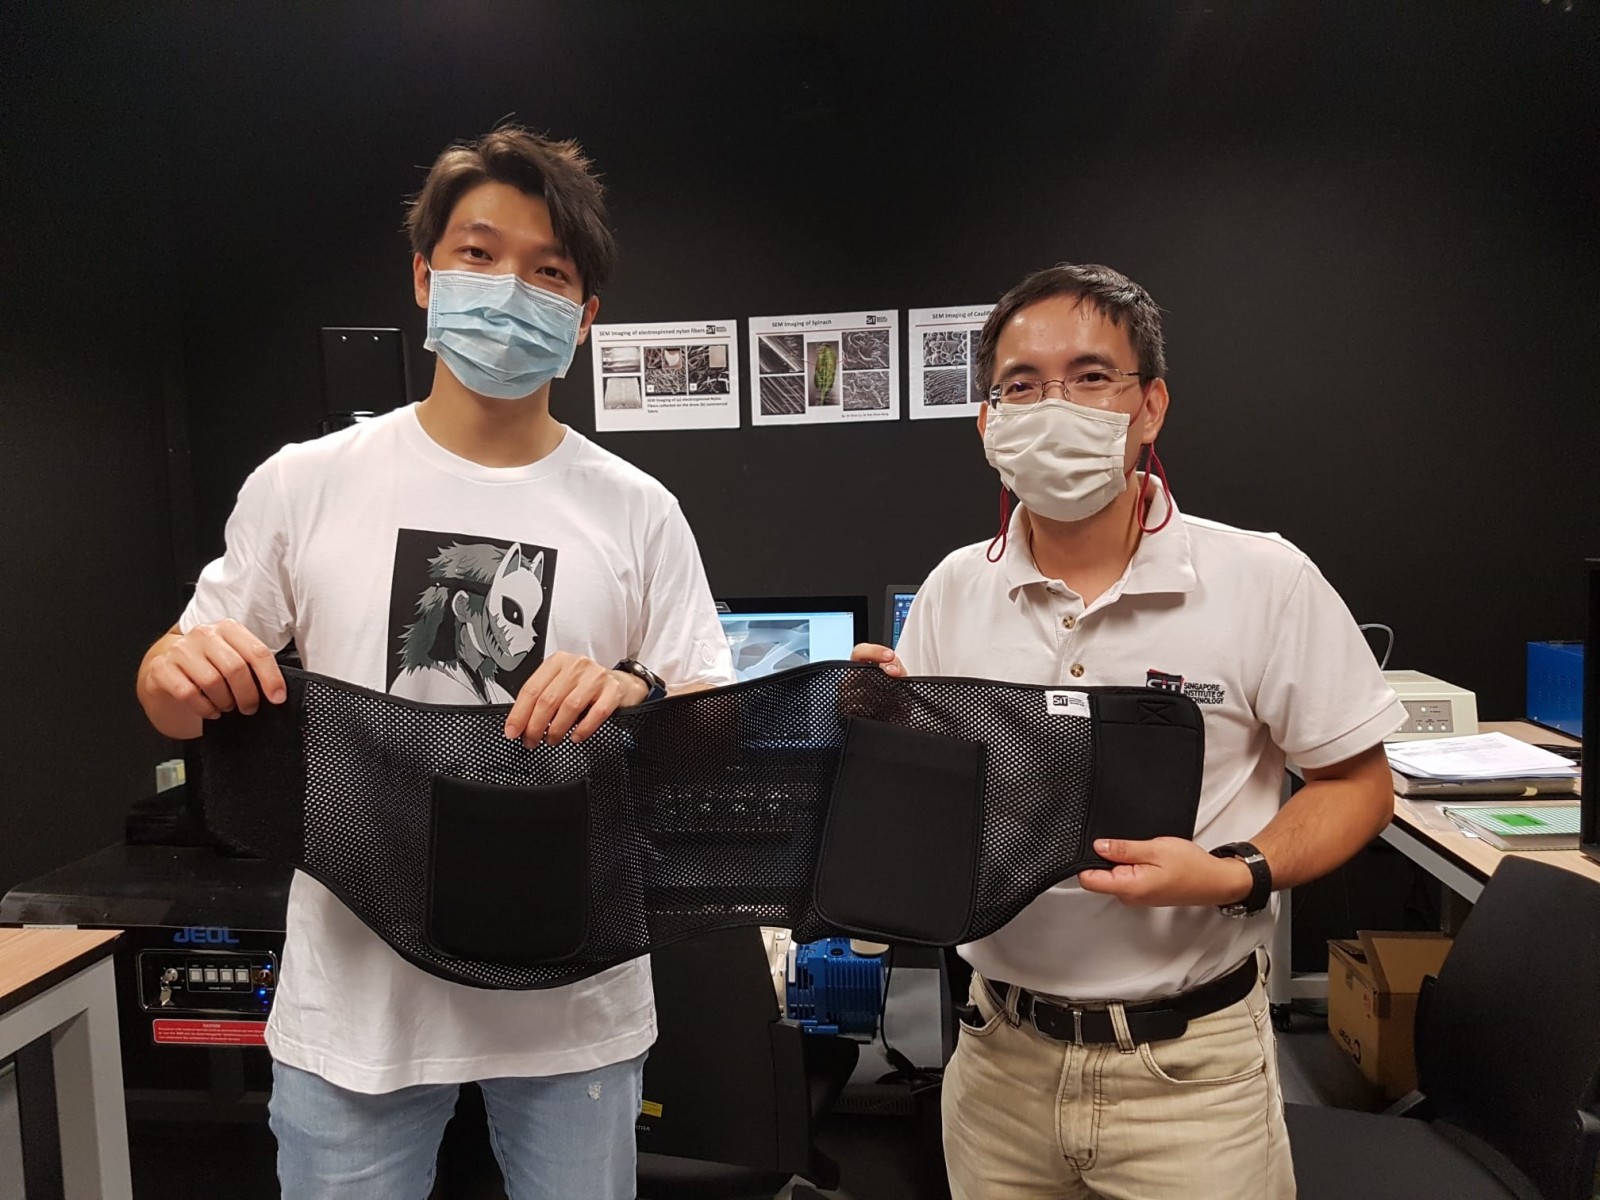 Associate Professor Soh Chew Beng (right), Programme Leader, Sustainable Infrastructure Engineering (Building Services), SIT and Mr Samuel Lim, former Research Engineer at SIT, displaying the hip protector belts in the characterisation lab at SIT@Dover, where they performed material characterisation.